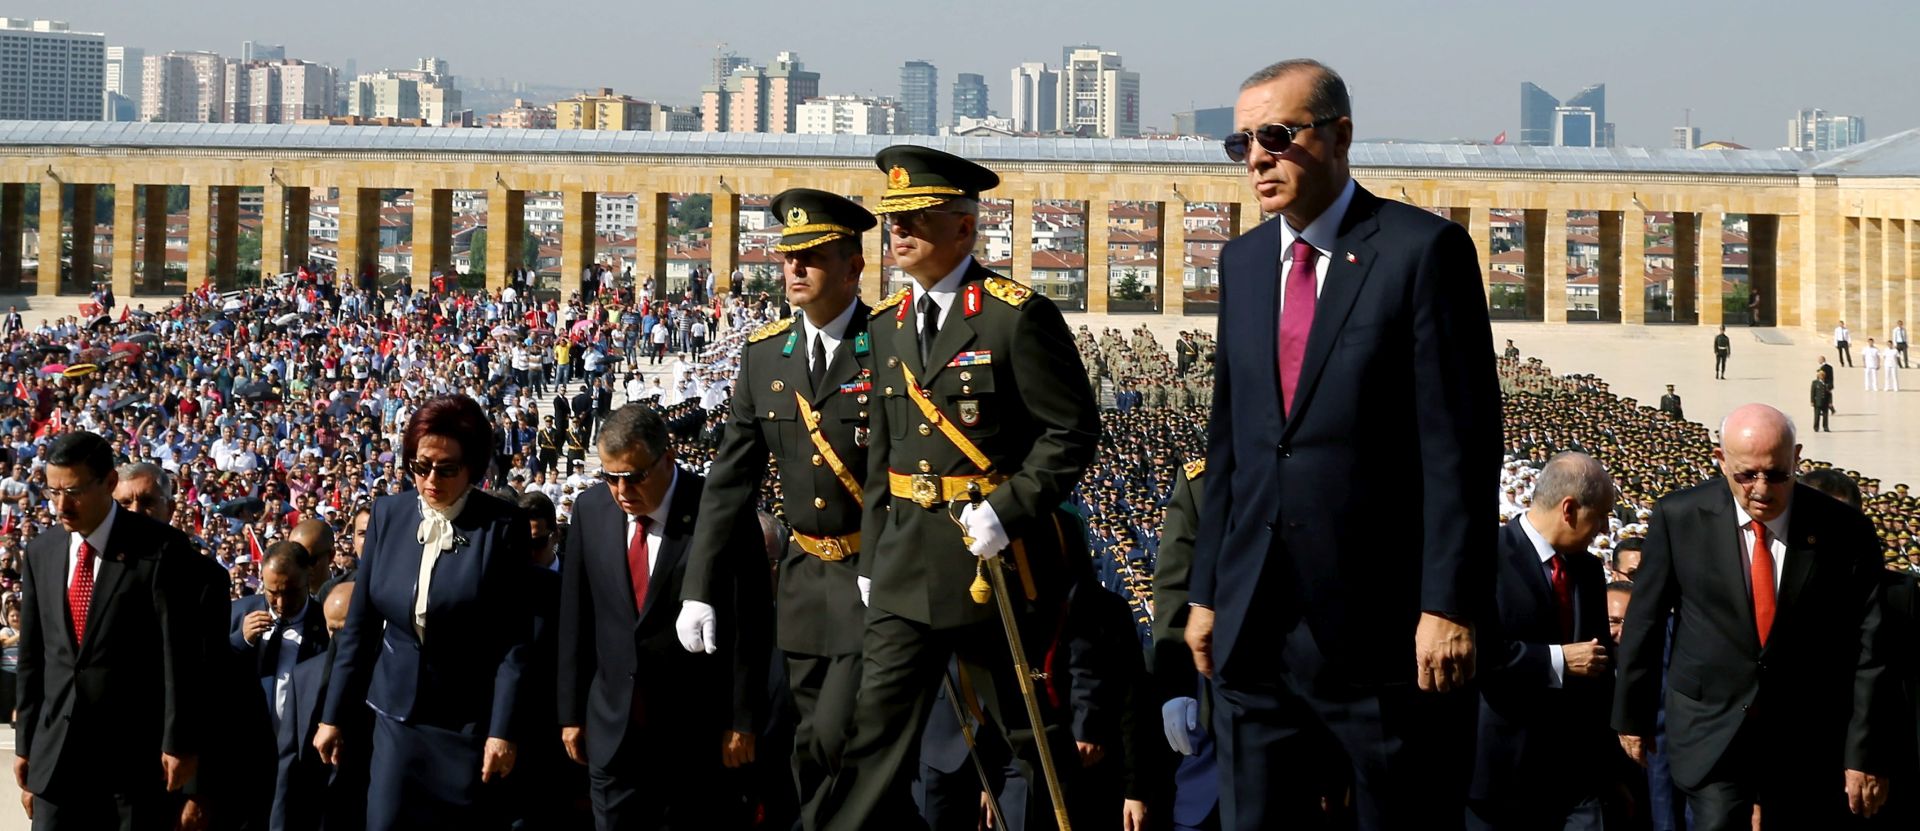 epa05515045 A handout picture provided by Turkish President Press office shows, Turkish President Recep Tayyip Erdogan (2-R), visits the Mustafa Kemal Ataturk Mausoleum, founder of modern Turkey, before Turkish Victory Day ceremony in Ankara, Turkey, 30 August 2016. Turkey celebrates its Victory Day in commemoration of the Battle of Dumlupinar, a key victory over Greece on 30 August 1922 in Turkey's War of Independence.  EPA/TURKISH PRESIDENT PRESS OFFICE / HANDOUT  HANDOUT EDITORIAL USE ONLY/NO SALES